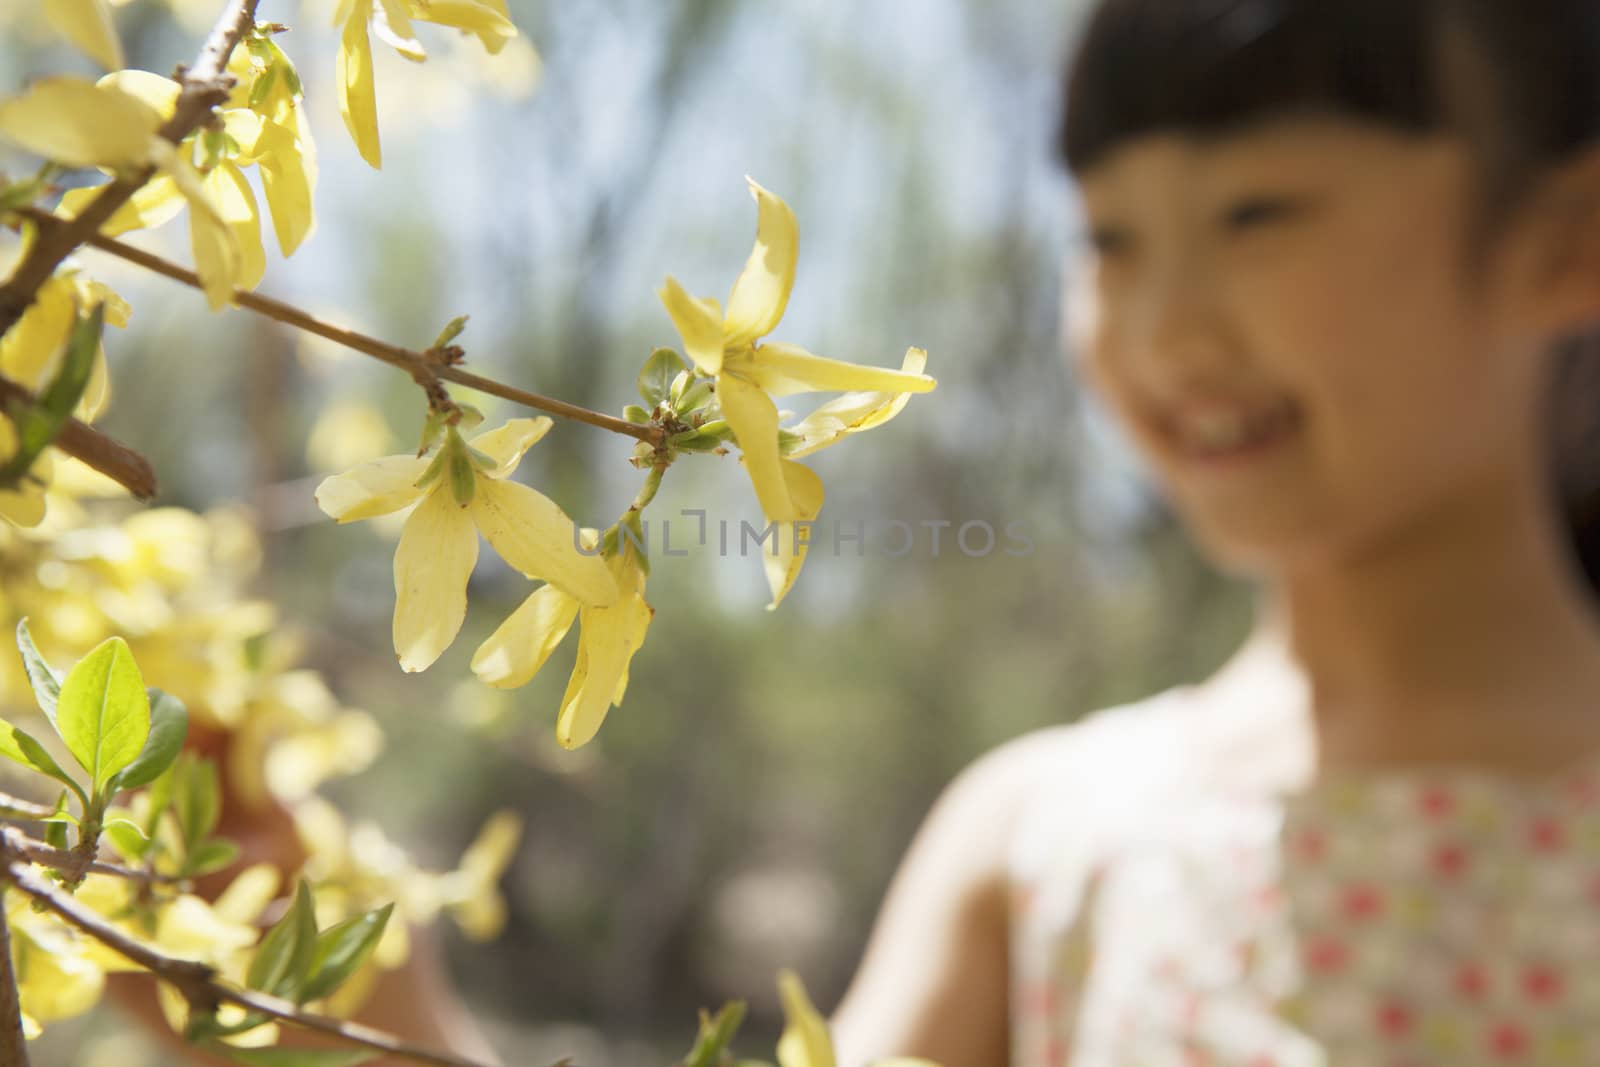 Smiling young girl looking at the yellow blossoms on the tree in the park in springtime by XiXinXing